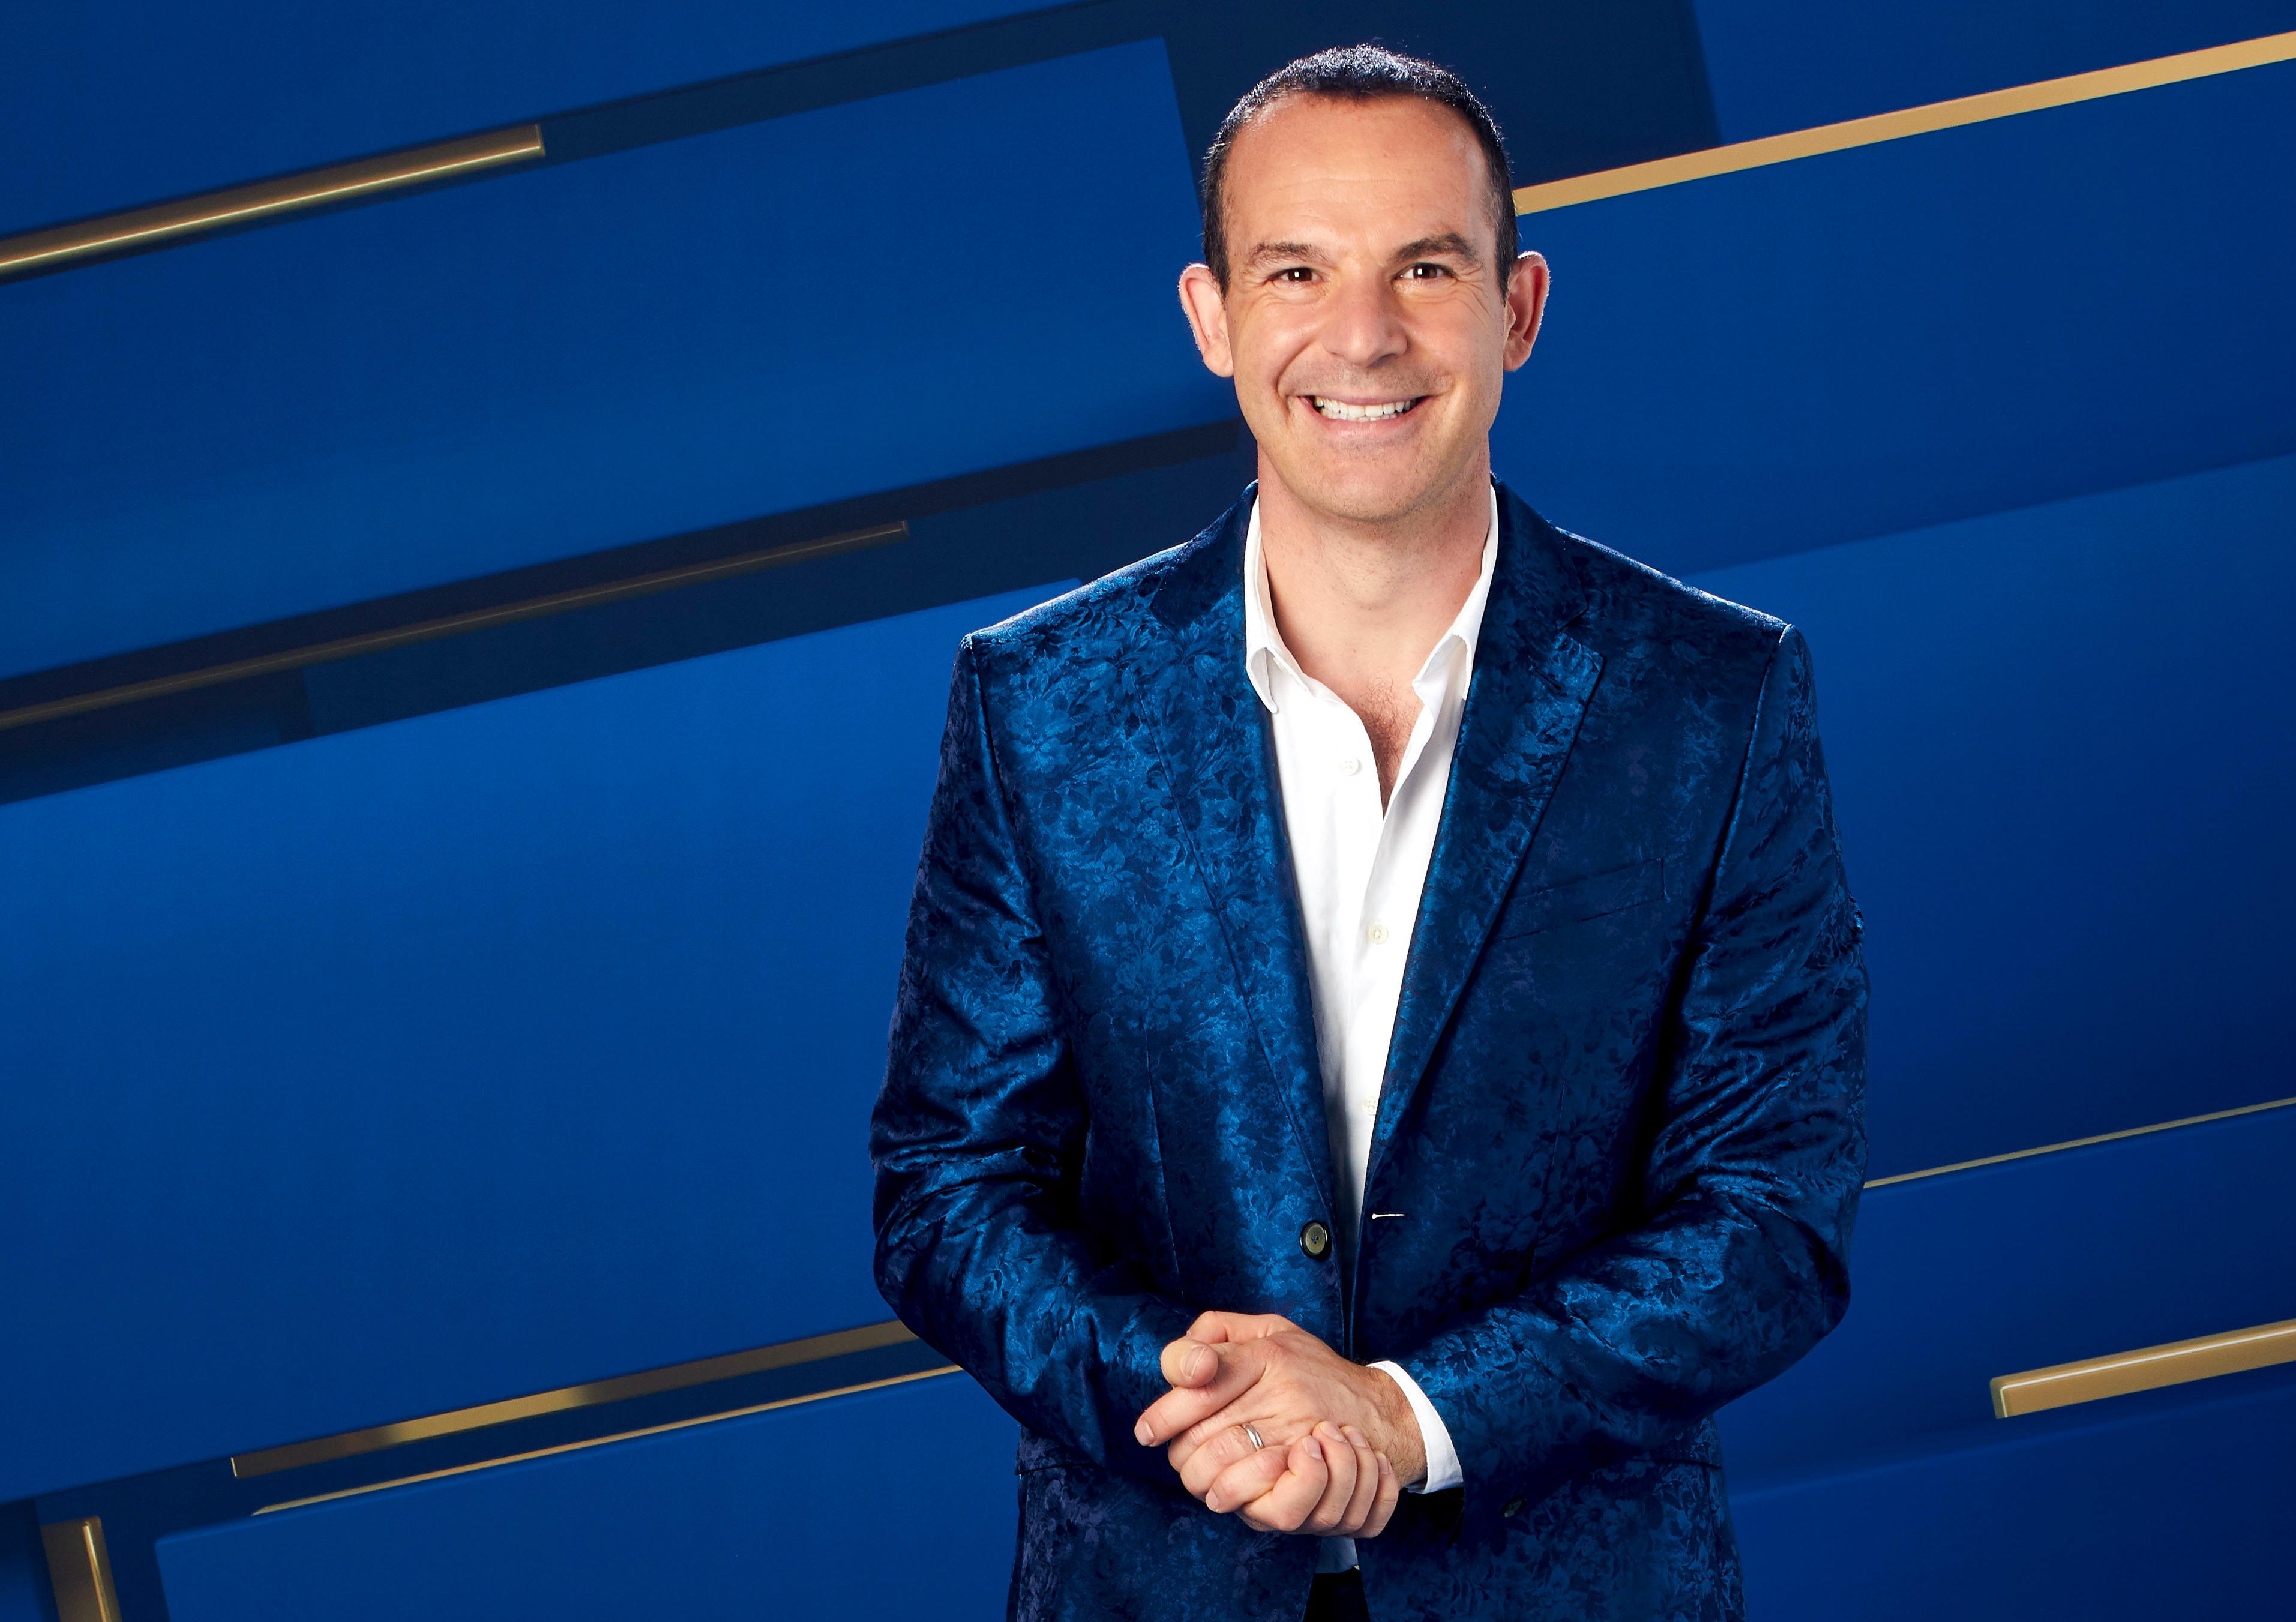 Martin Lewis has explained the Help to Save account on his ITV show